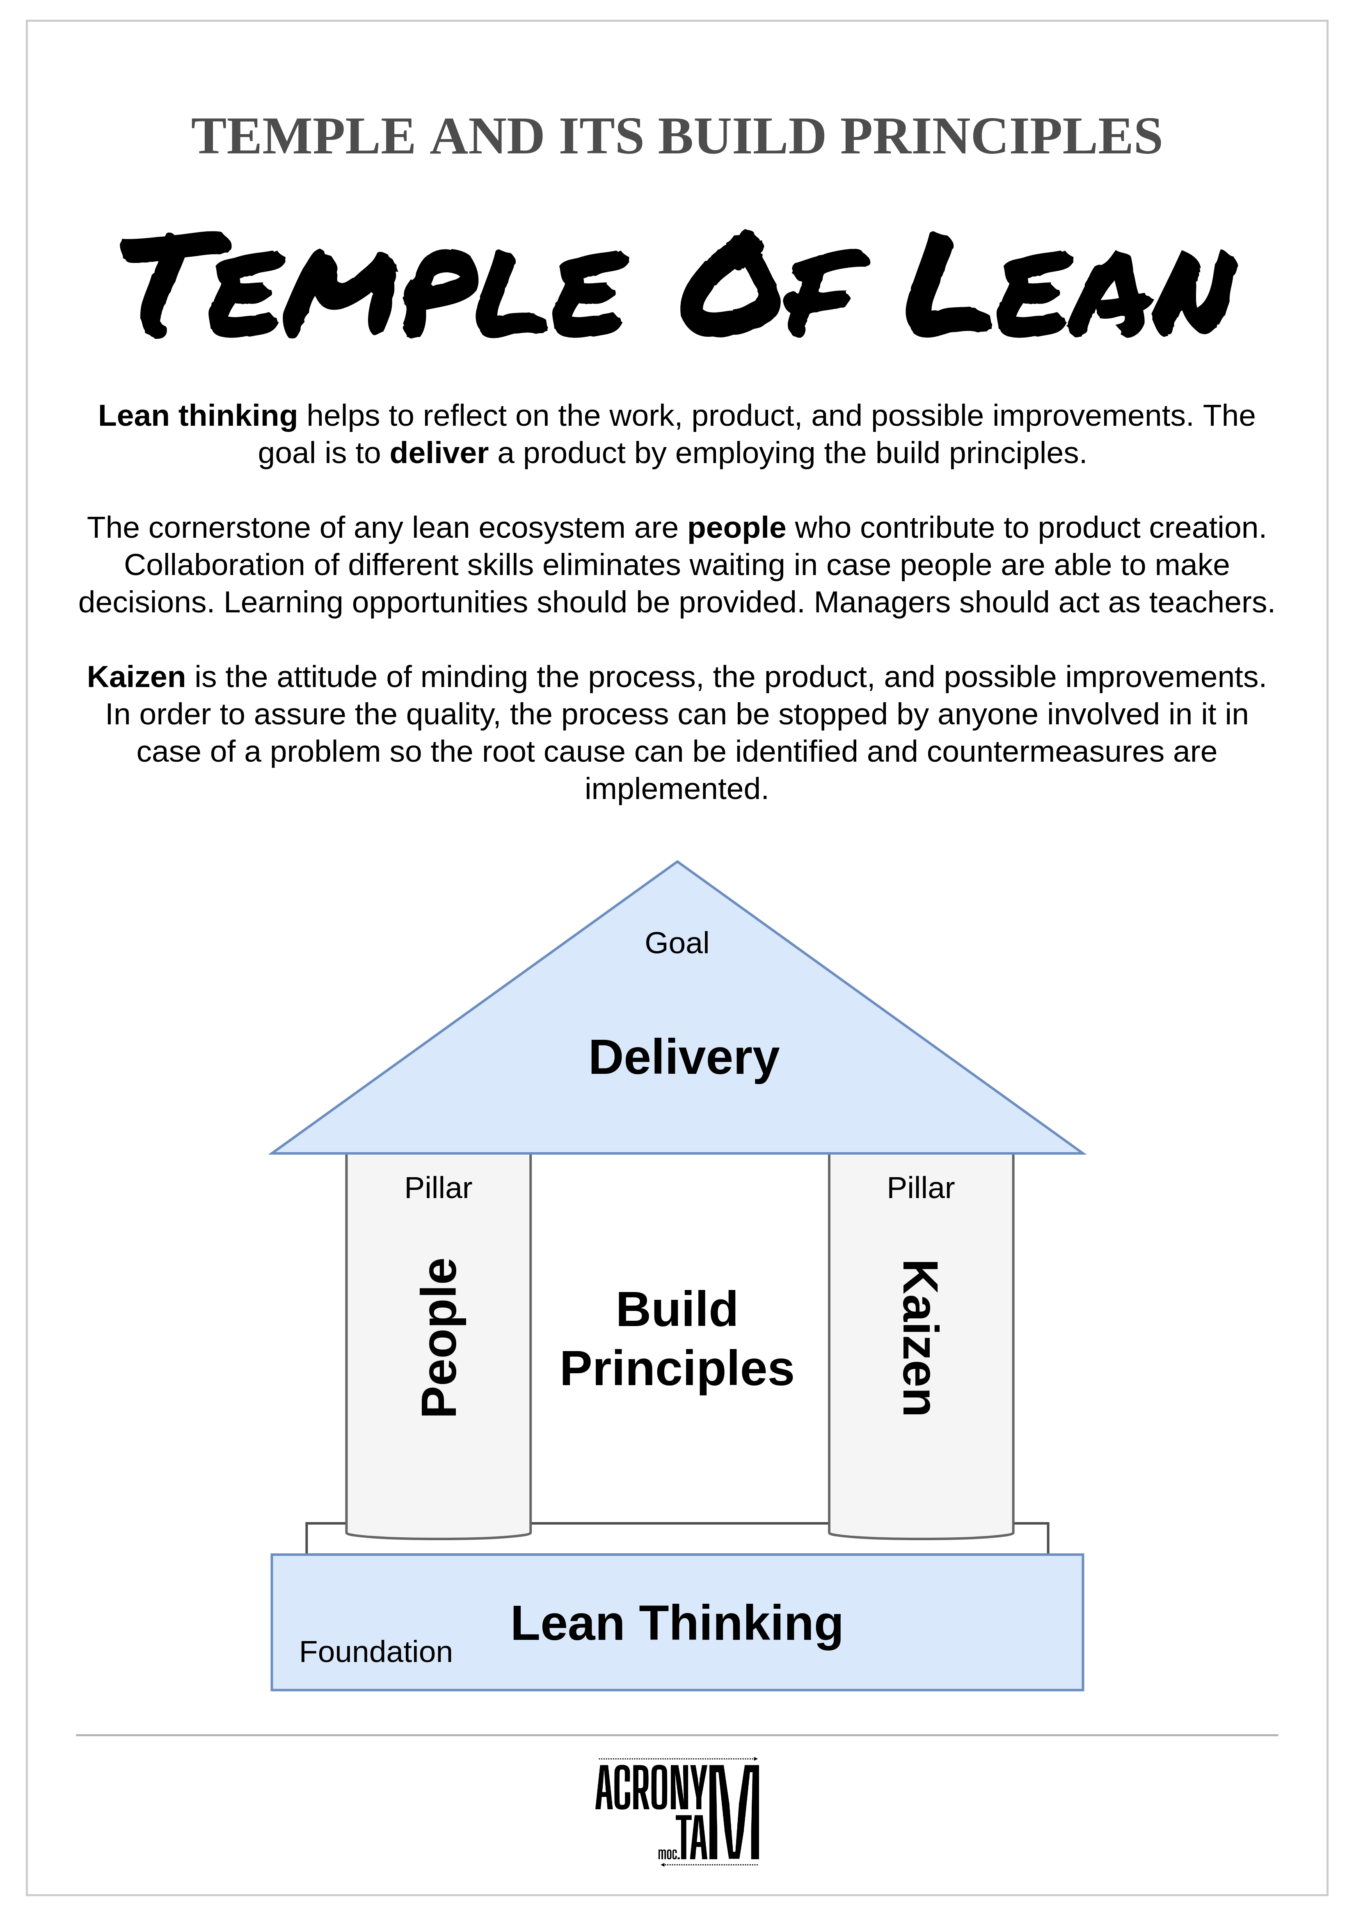 Lean Thinking - the Temple Of Lean